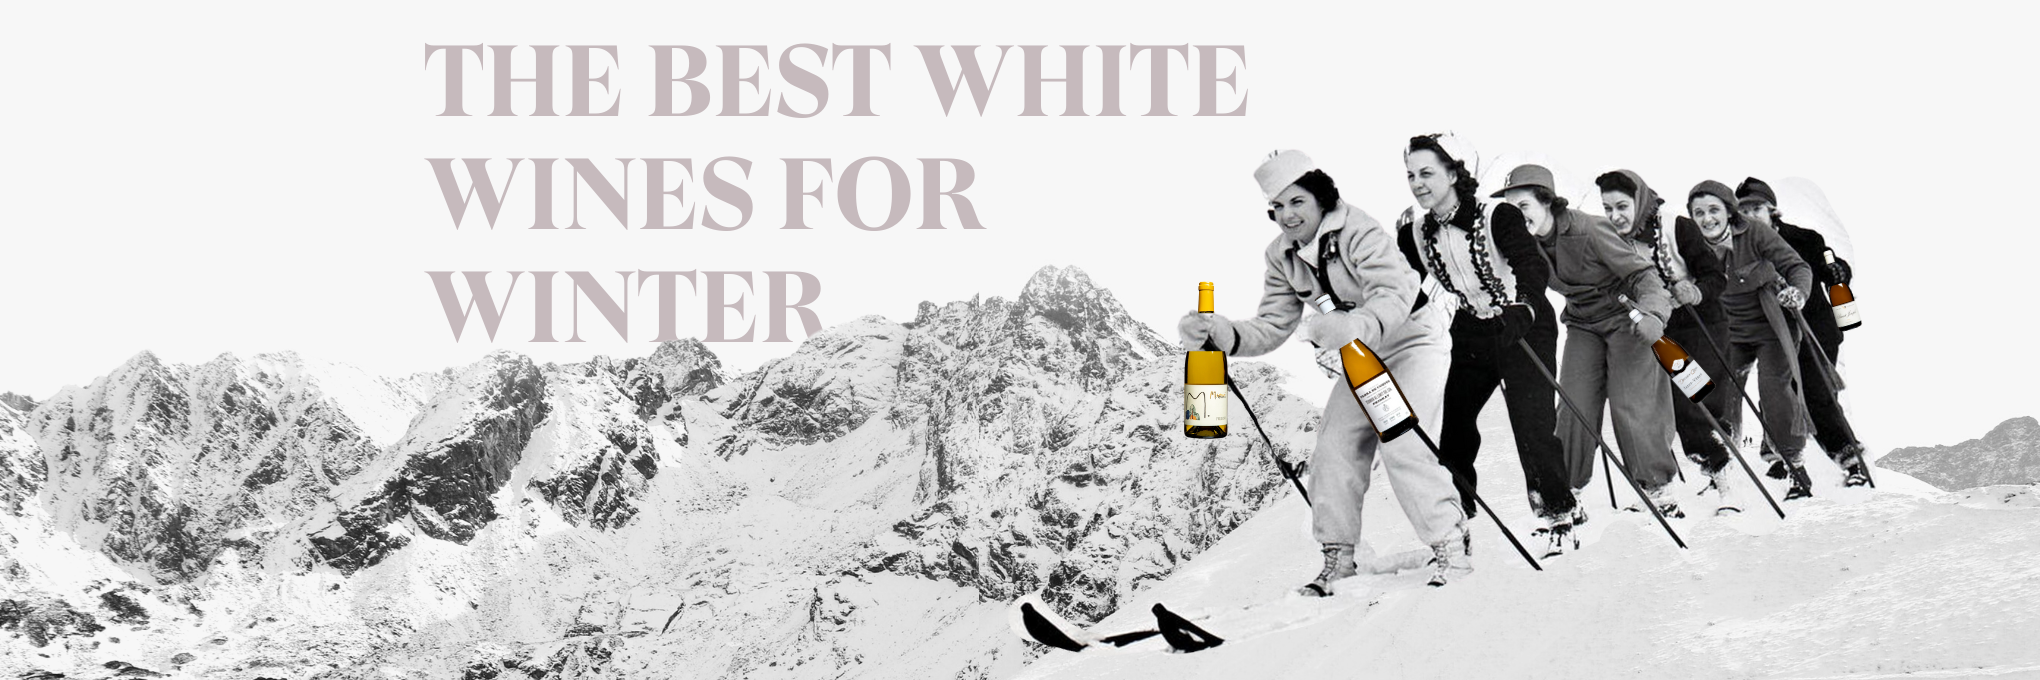 The Best White Wines for Cold Weather